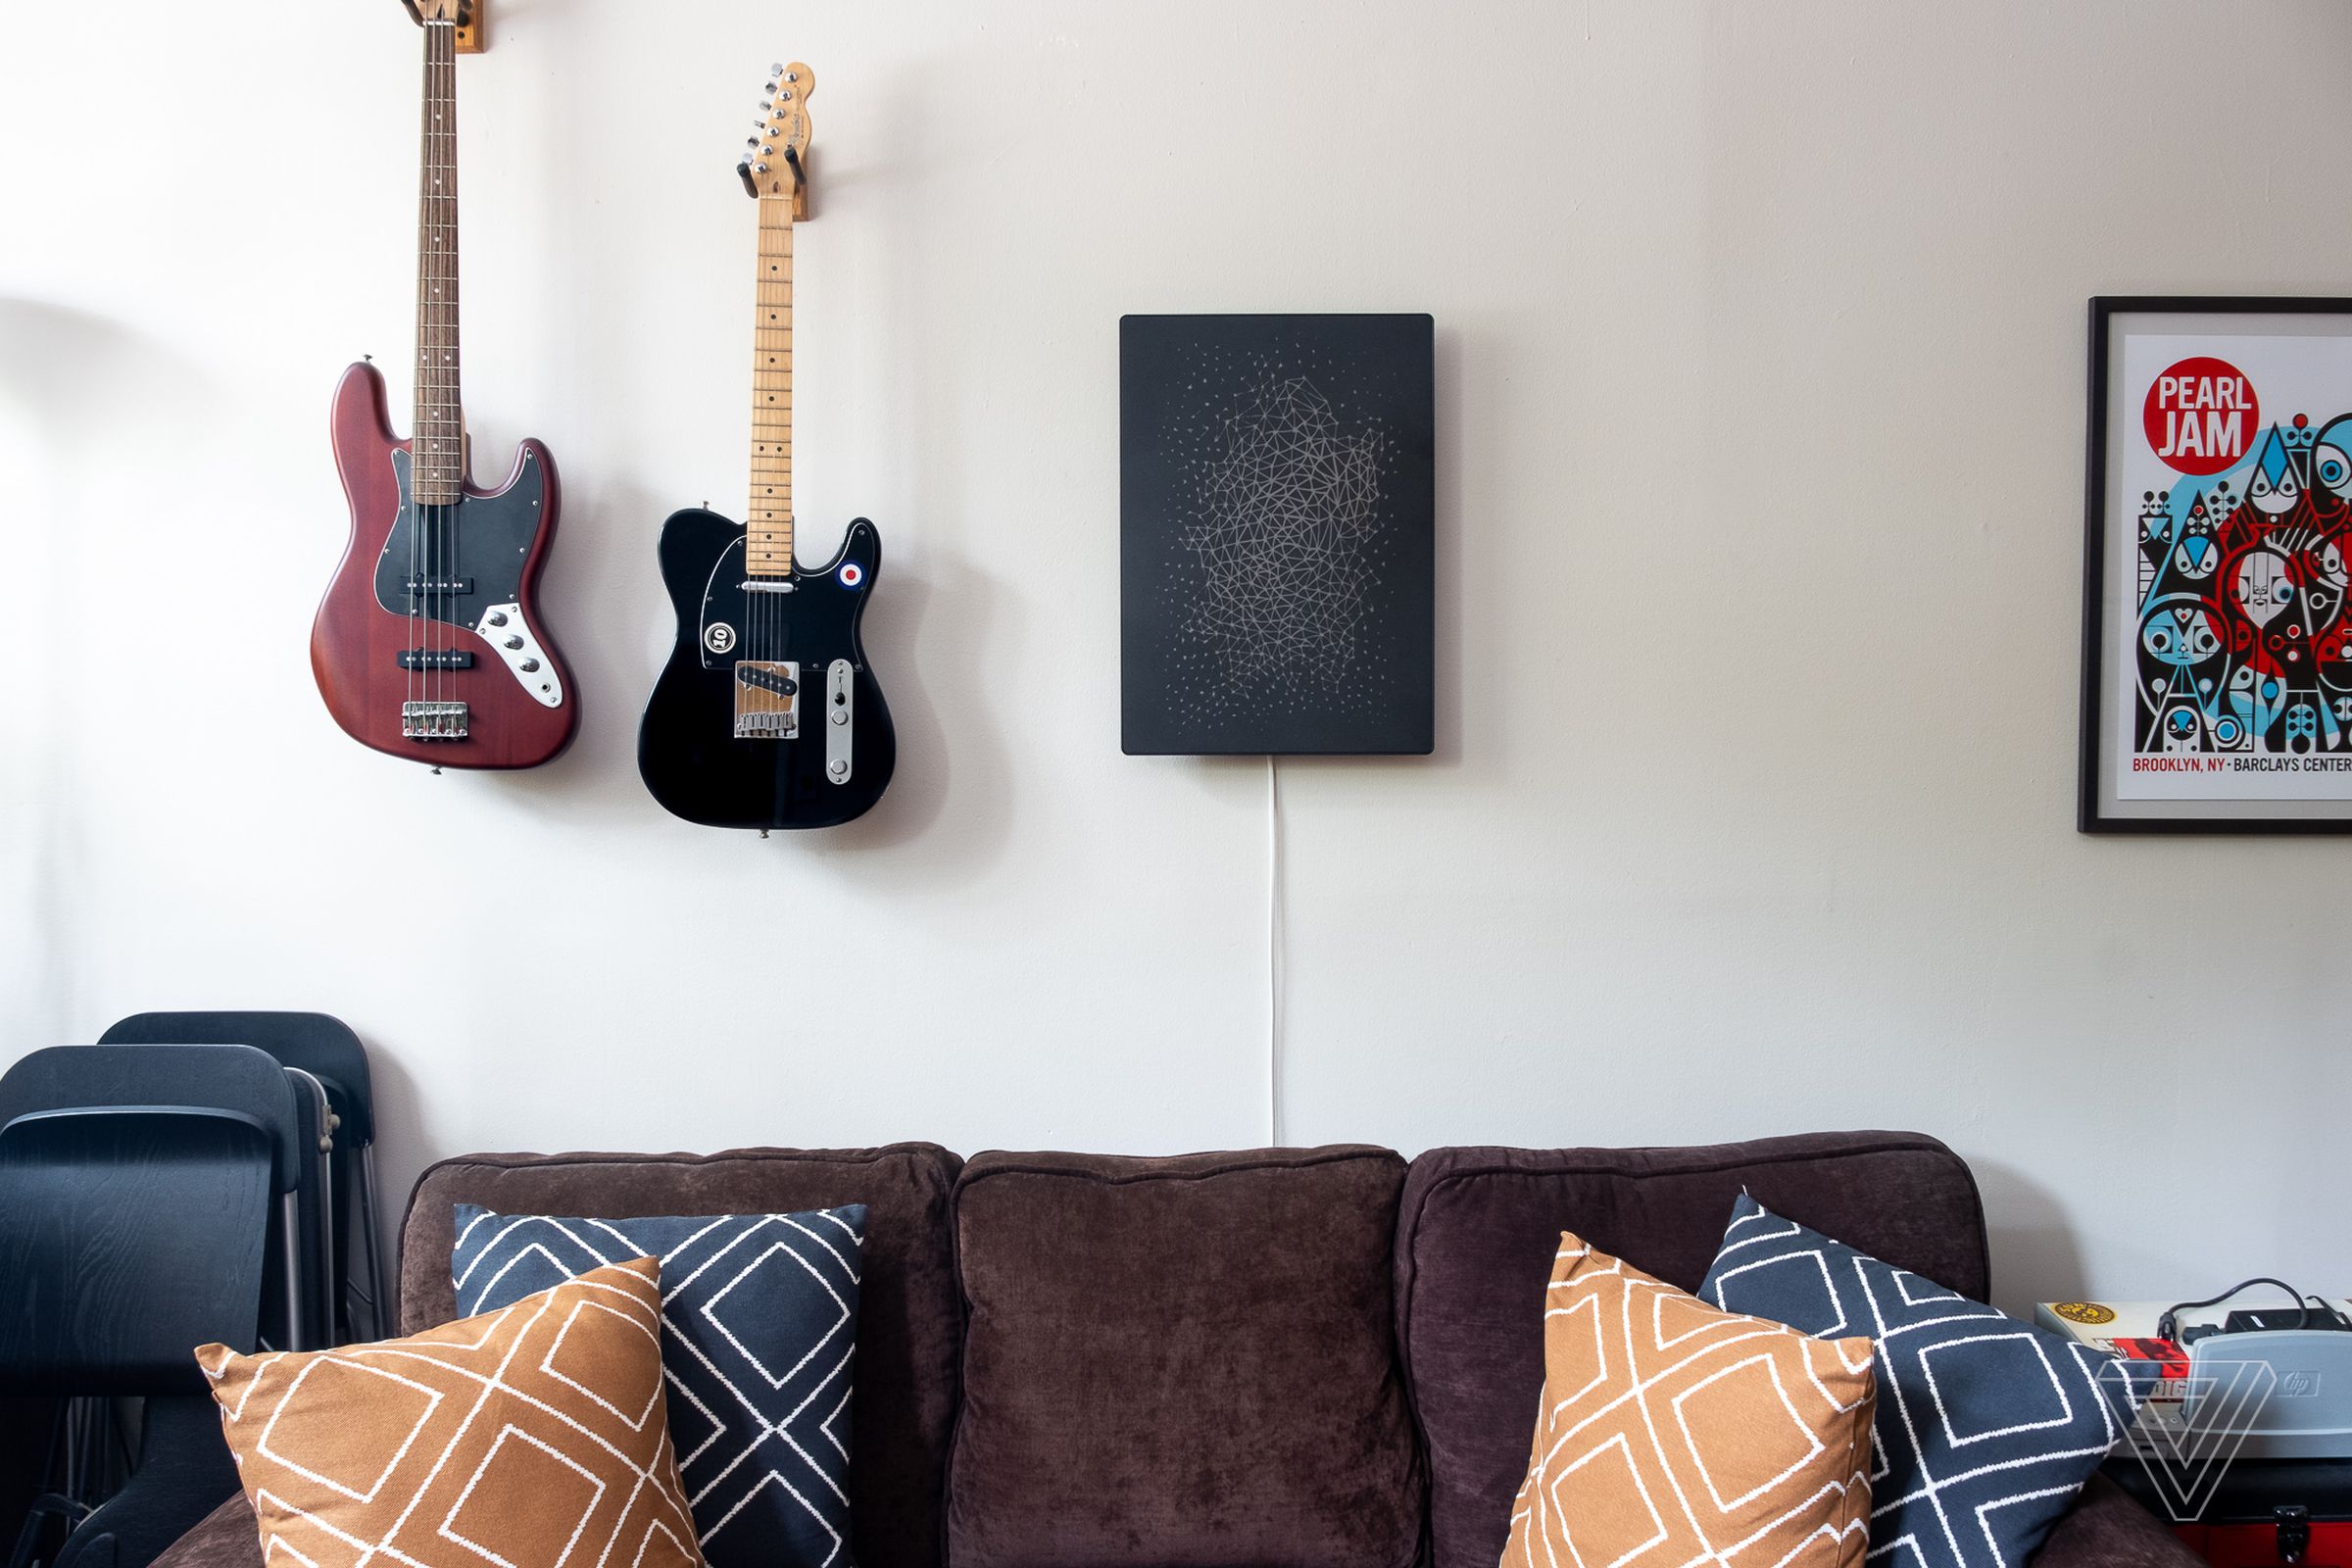 In terms of sound, the picture frame speaker is very close to a Sonos One.